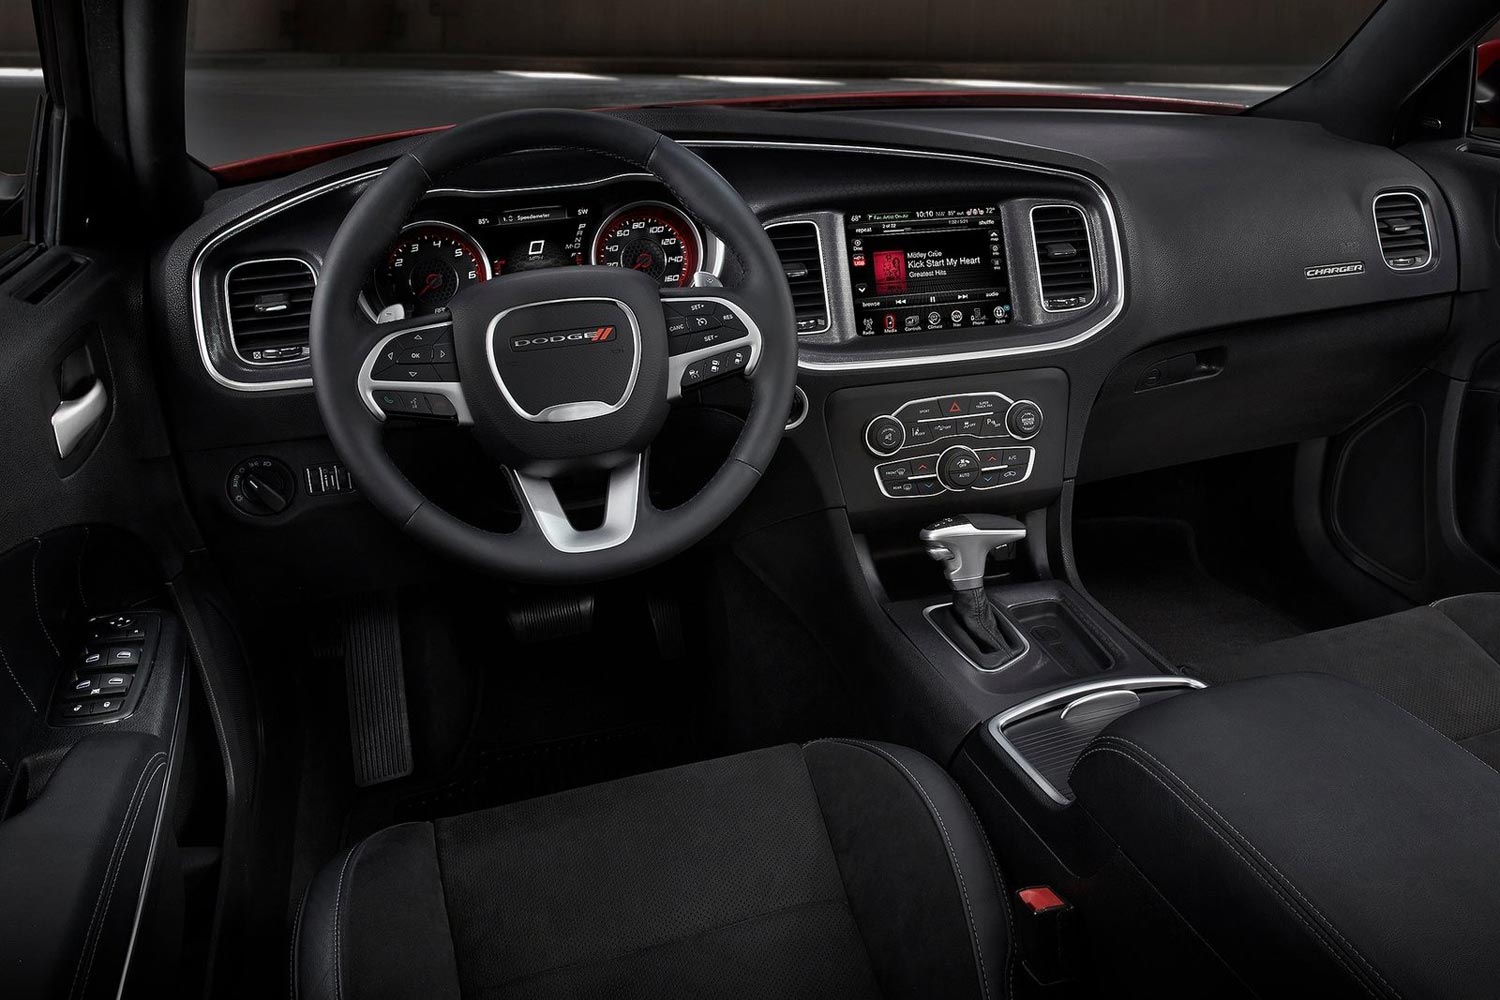 2017 dodge charger interior